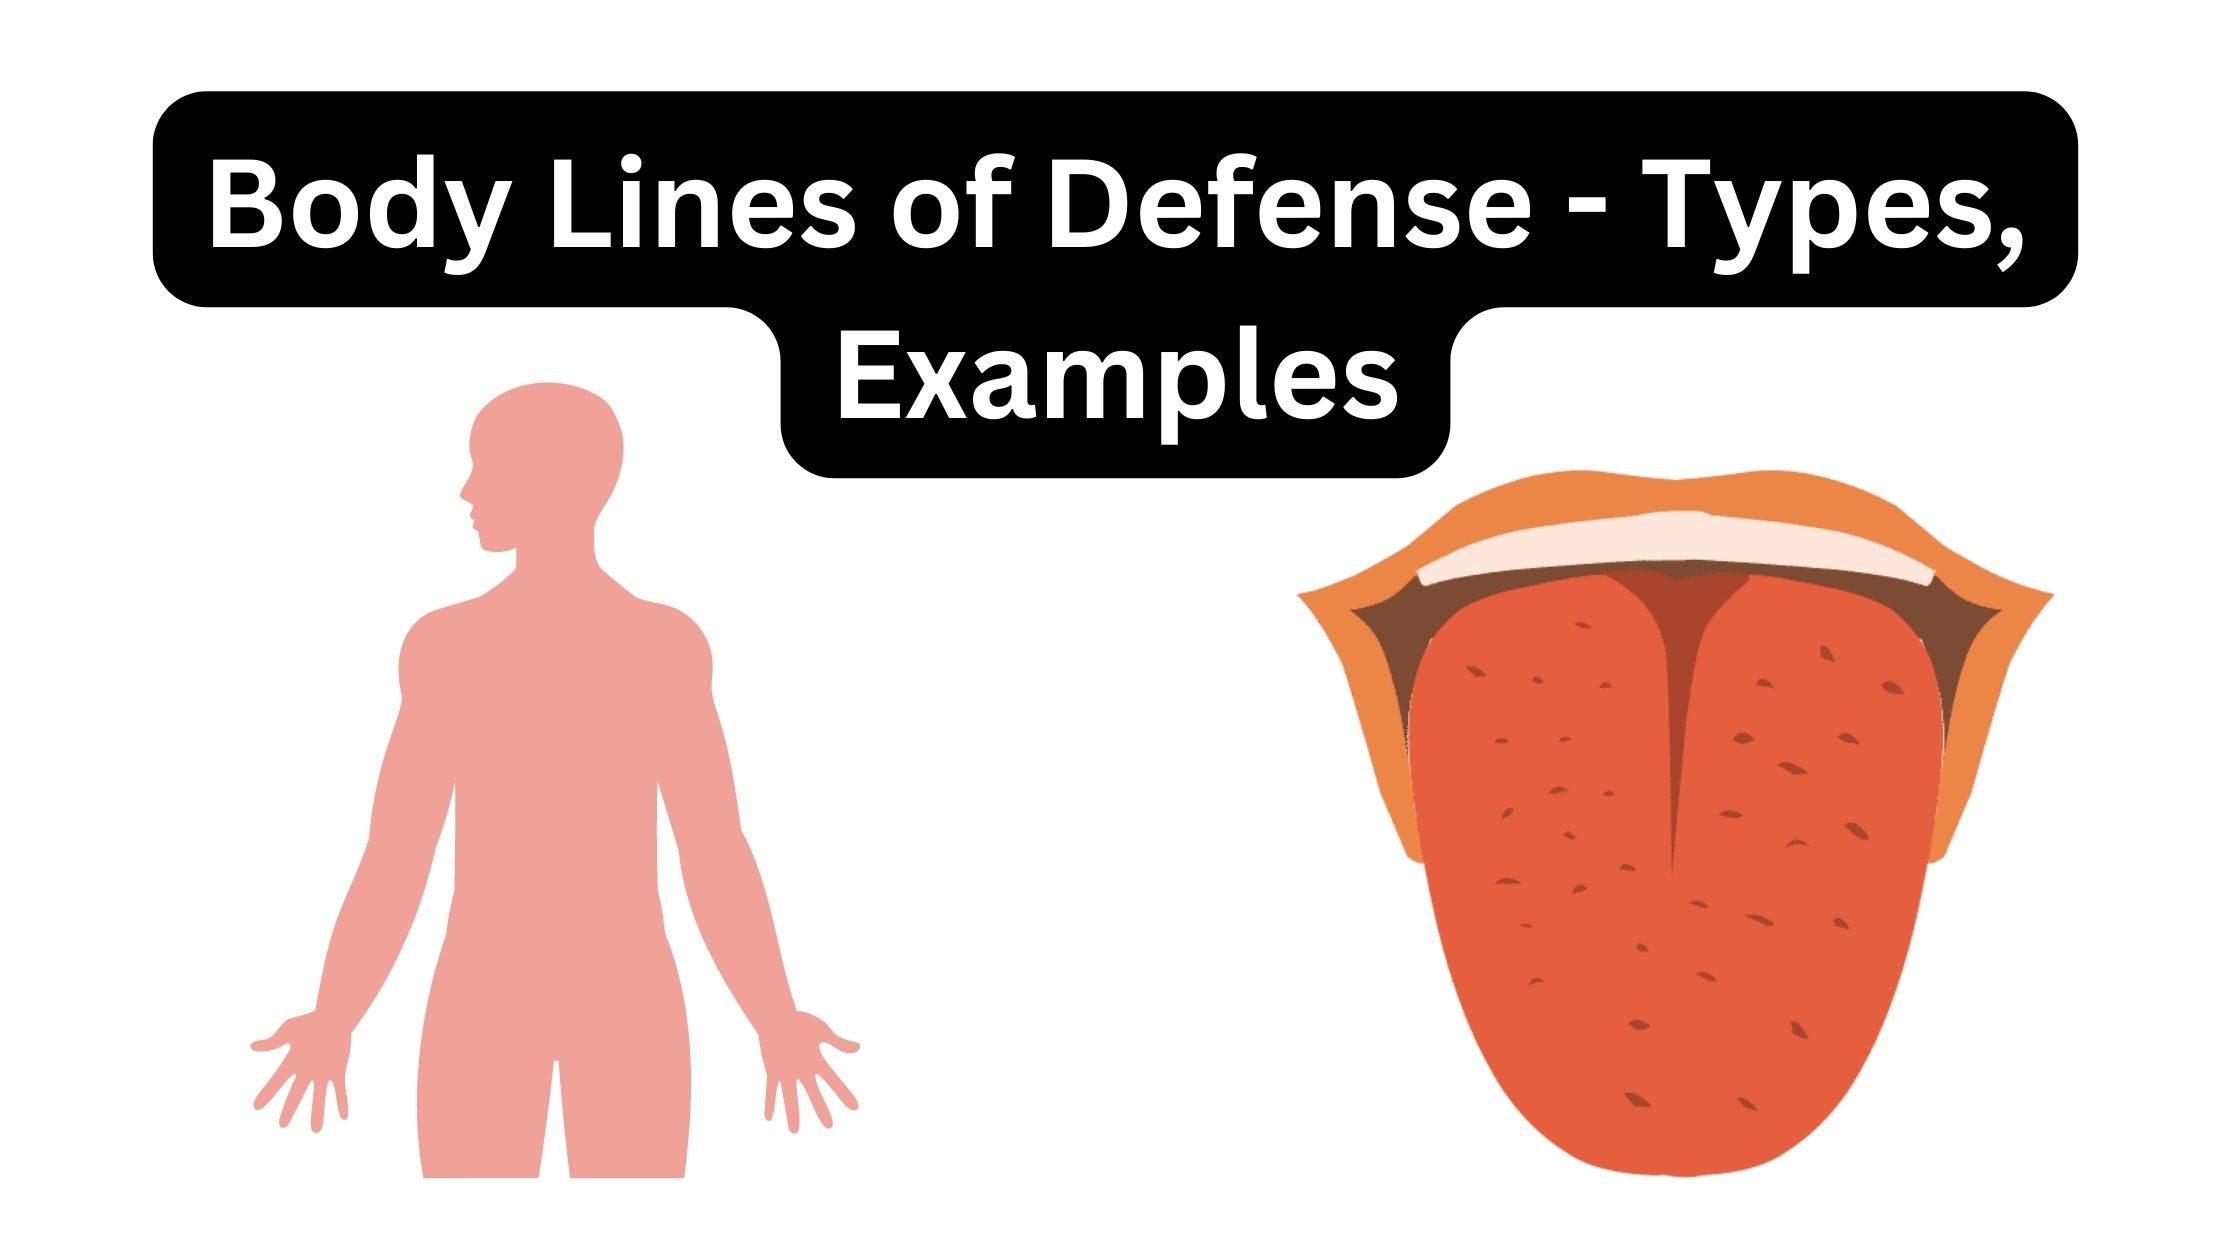 Body Lines of Defense - Types, Examples